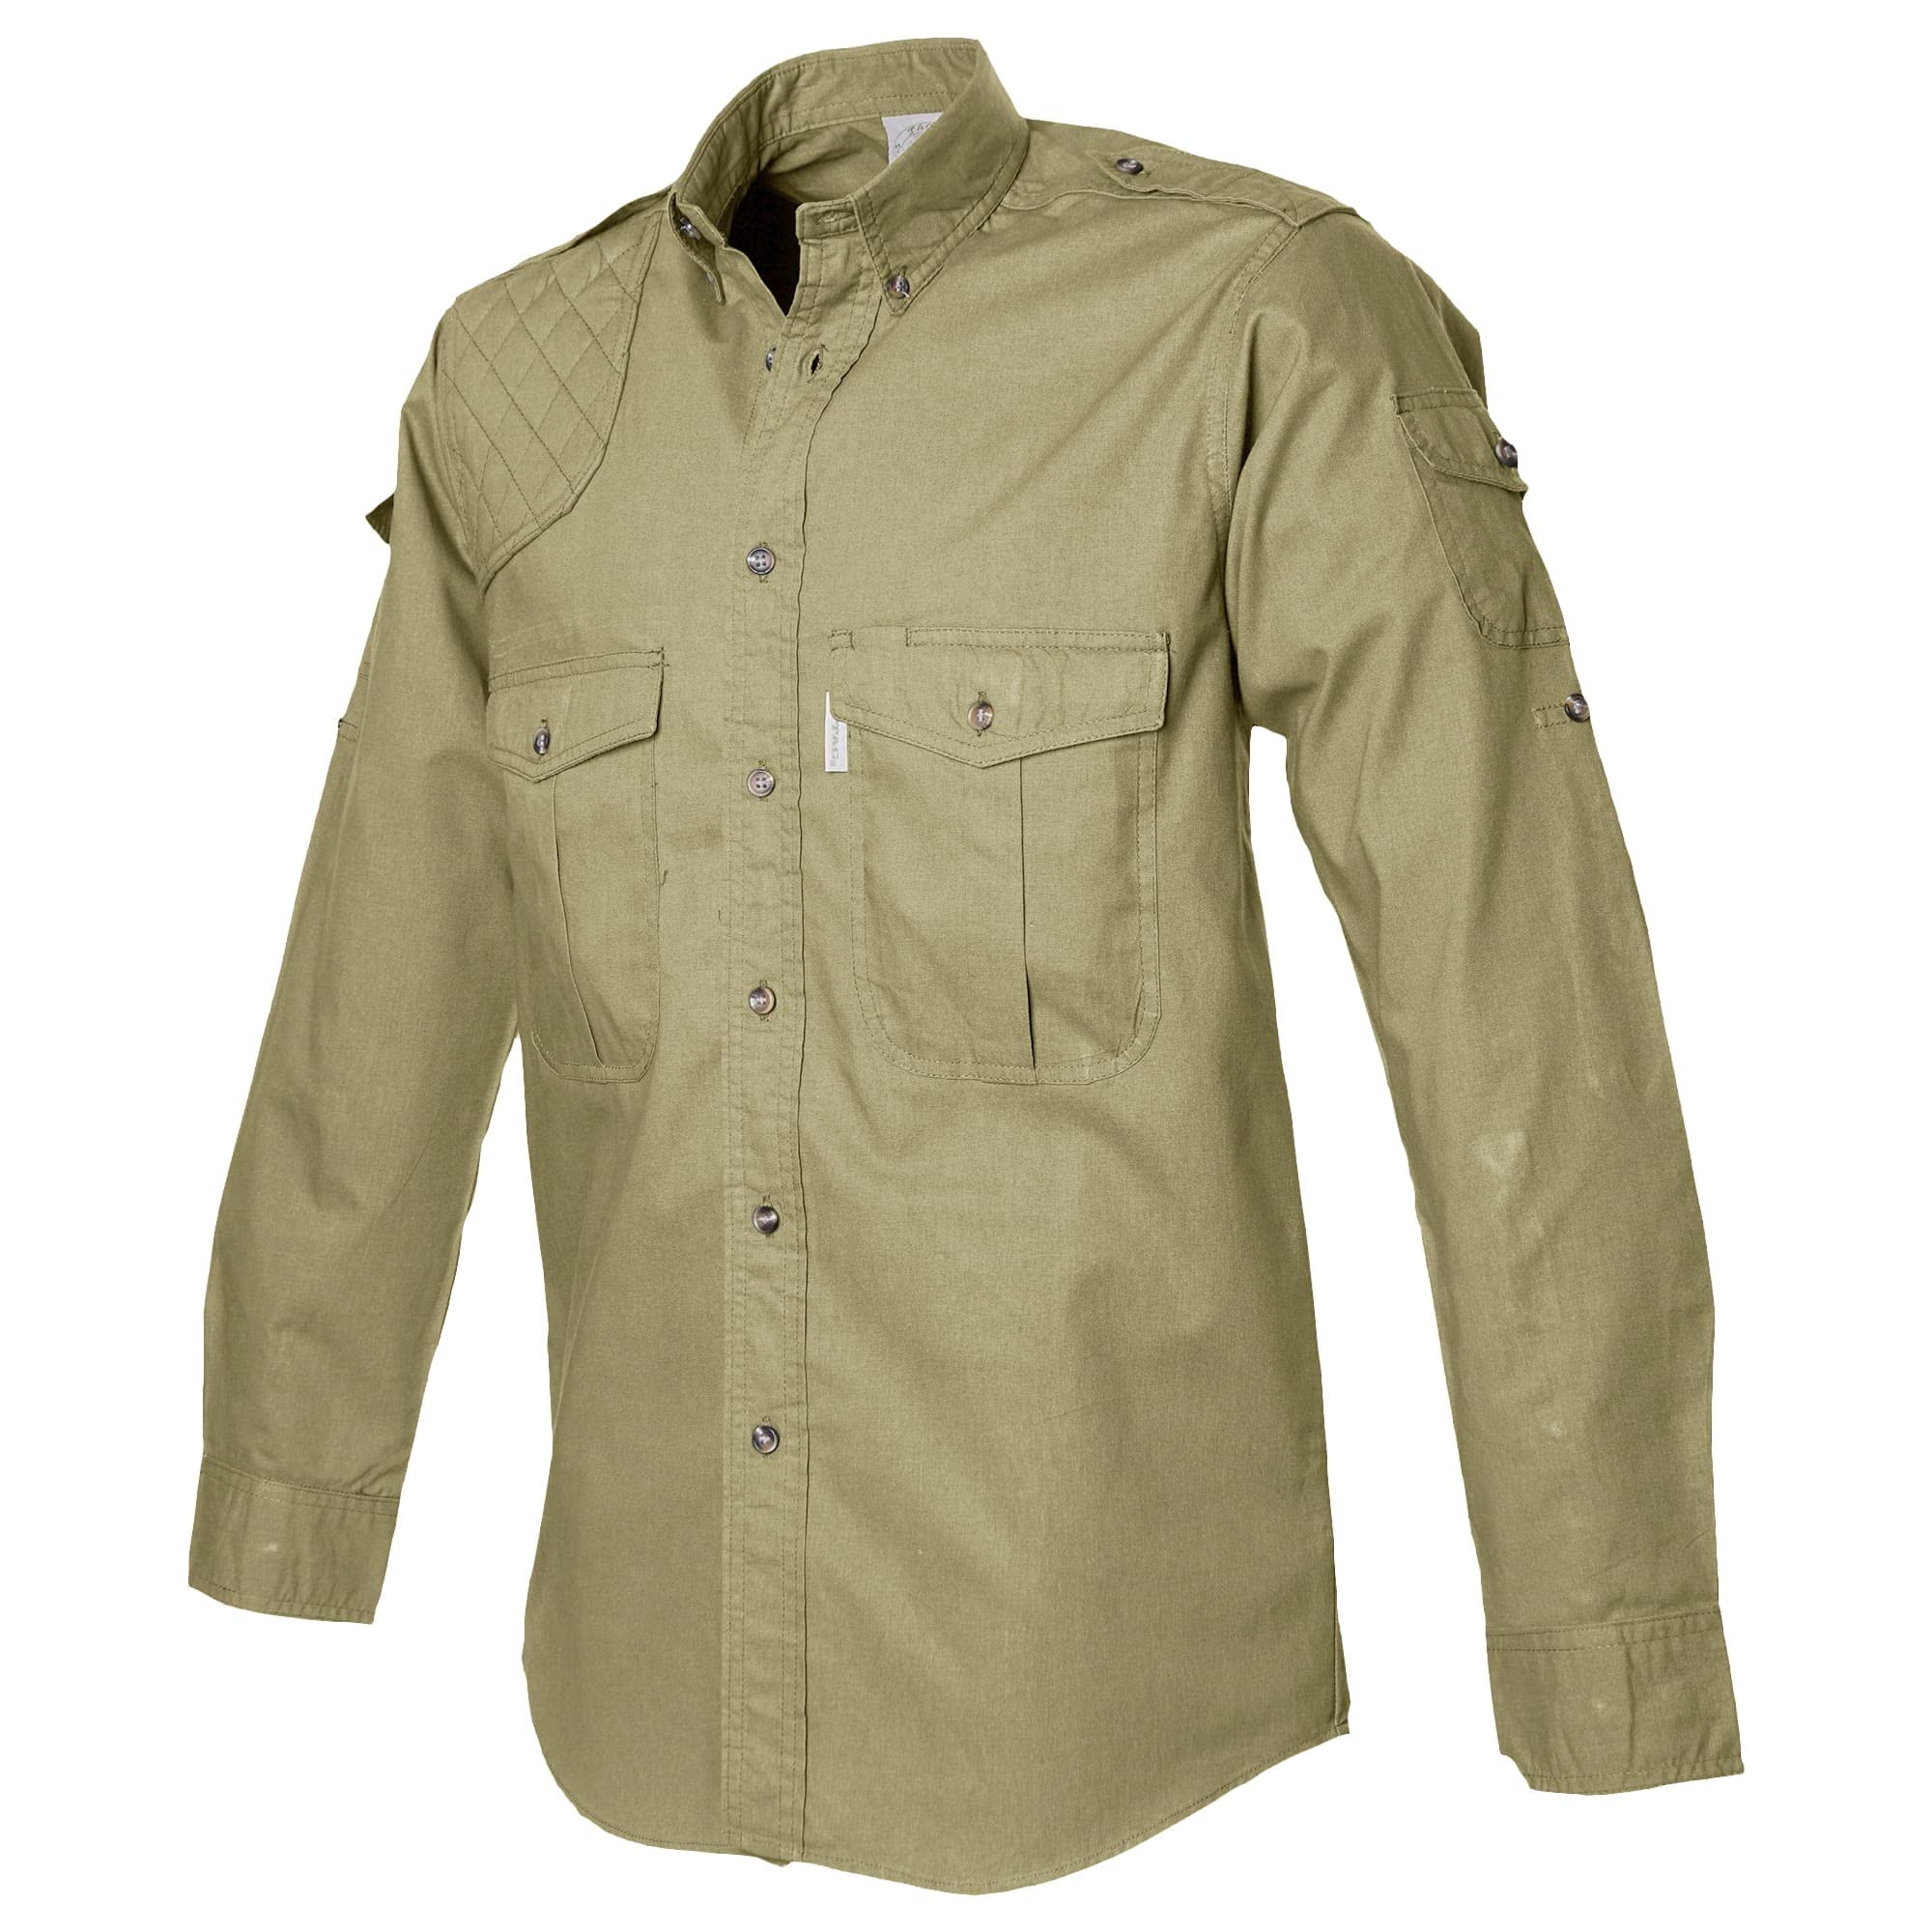 Shooting Shirt for men in long sleeves Shoulder recoil pad Two